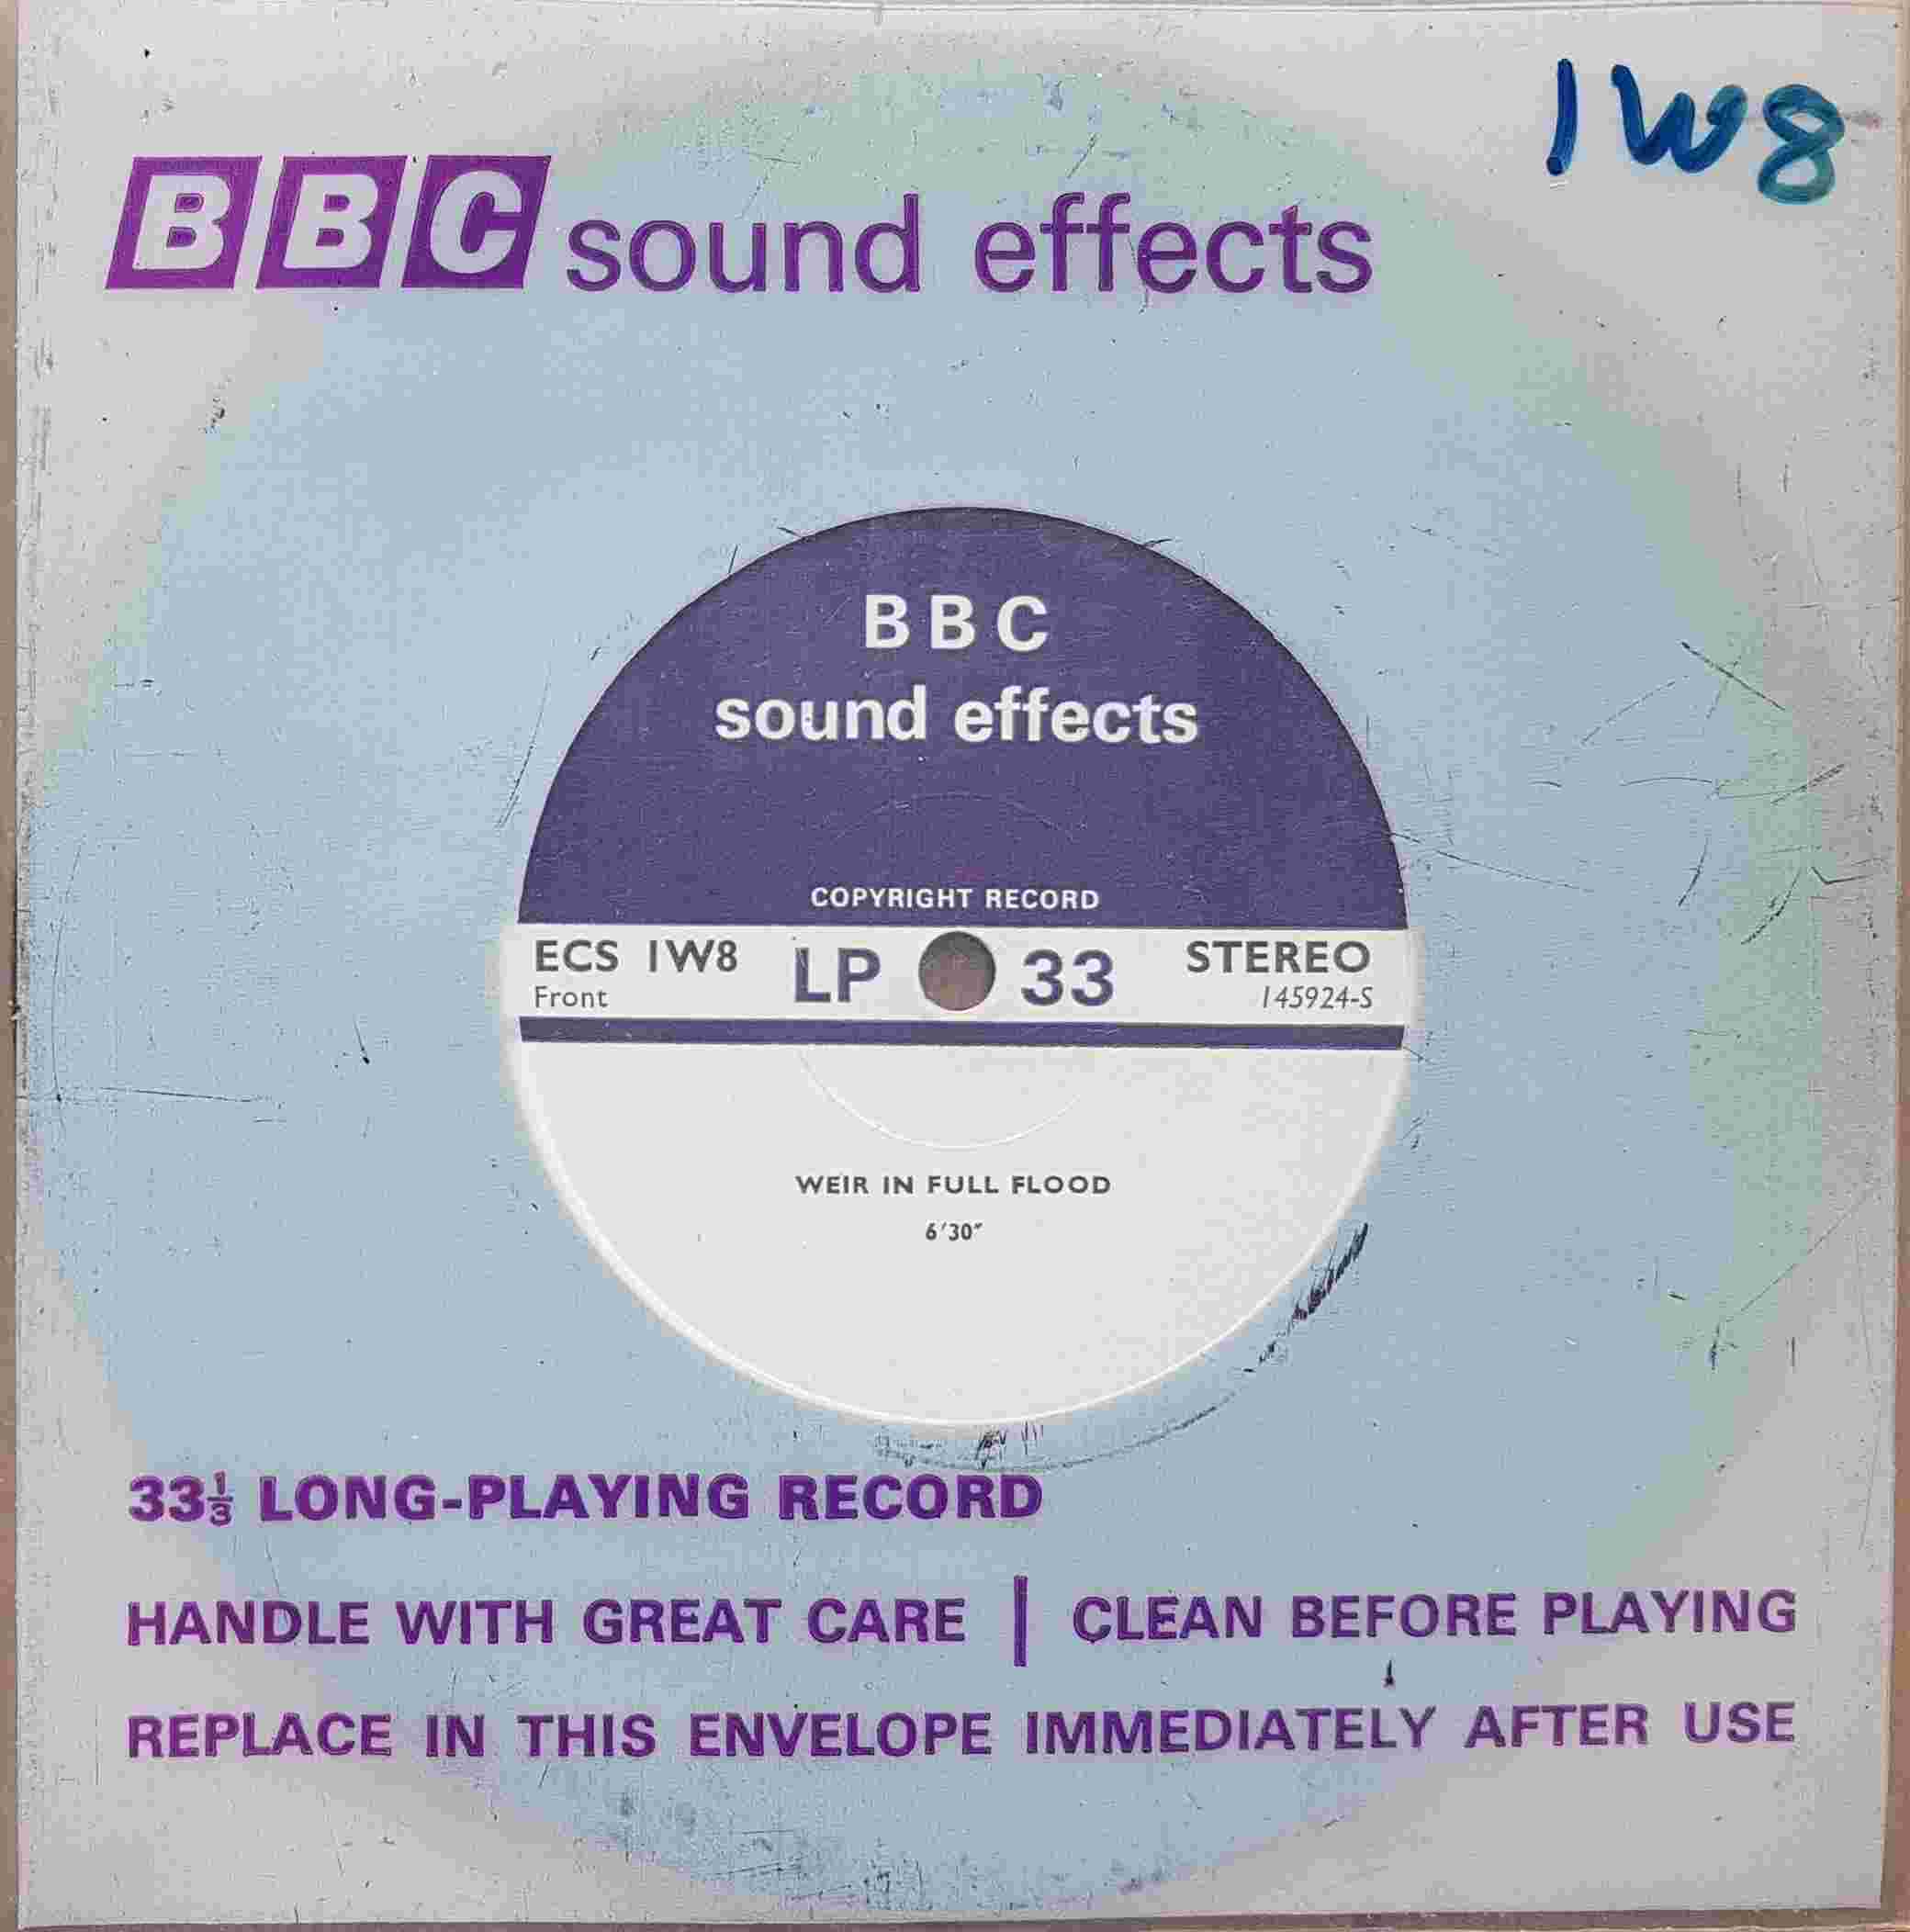 Picture of ECS 1W8 Weir in full flood / River rippling over stones by artist Not registered from the BBC singles - Records and Tapes library